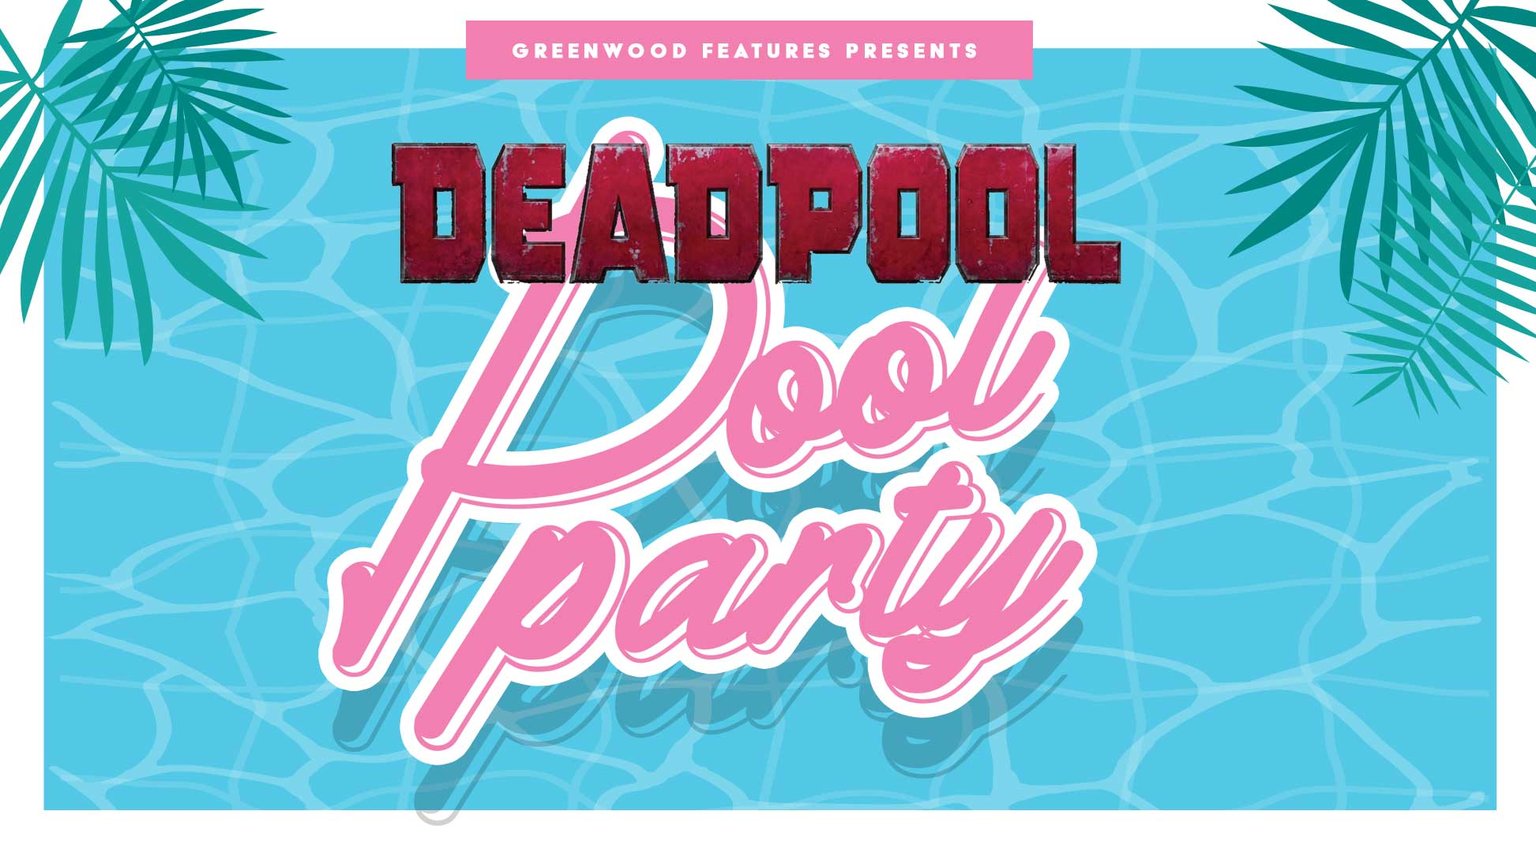 Join us for a fun night of pool games, tiki drinks and a great summer film!